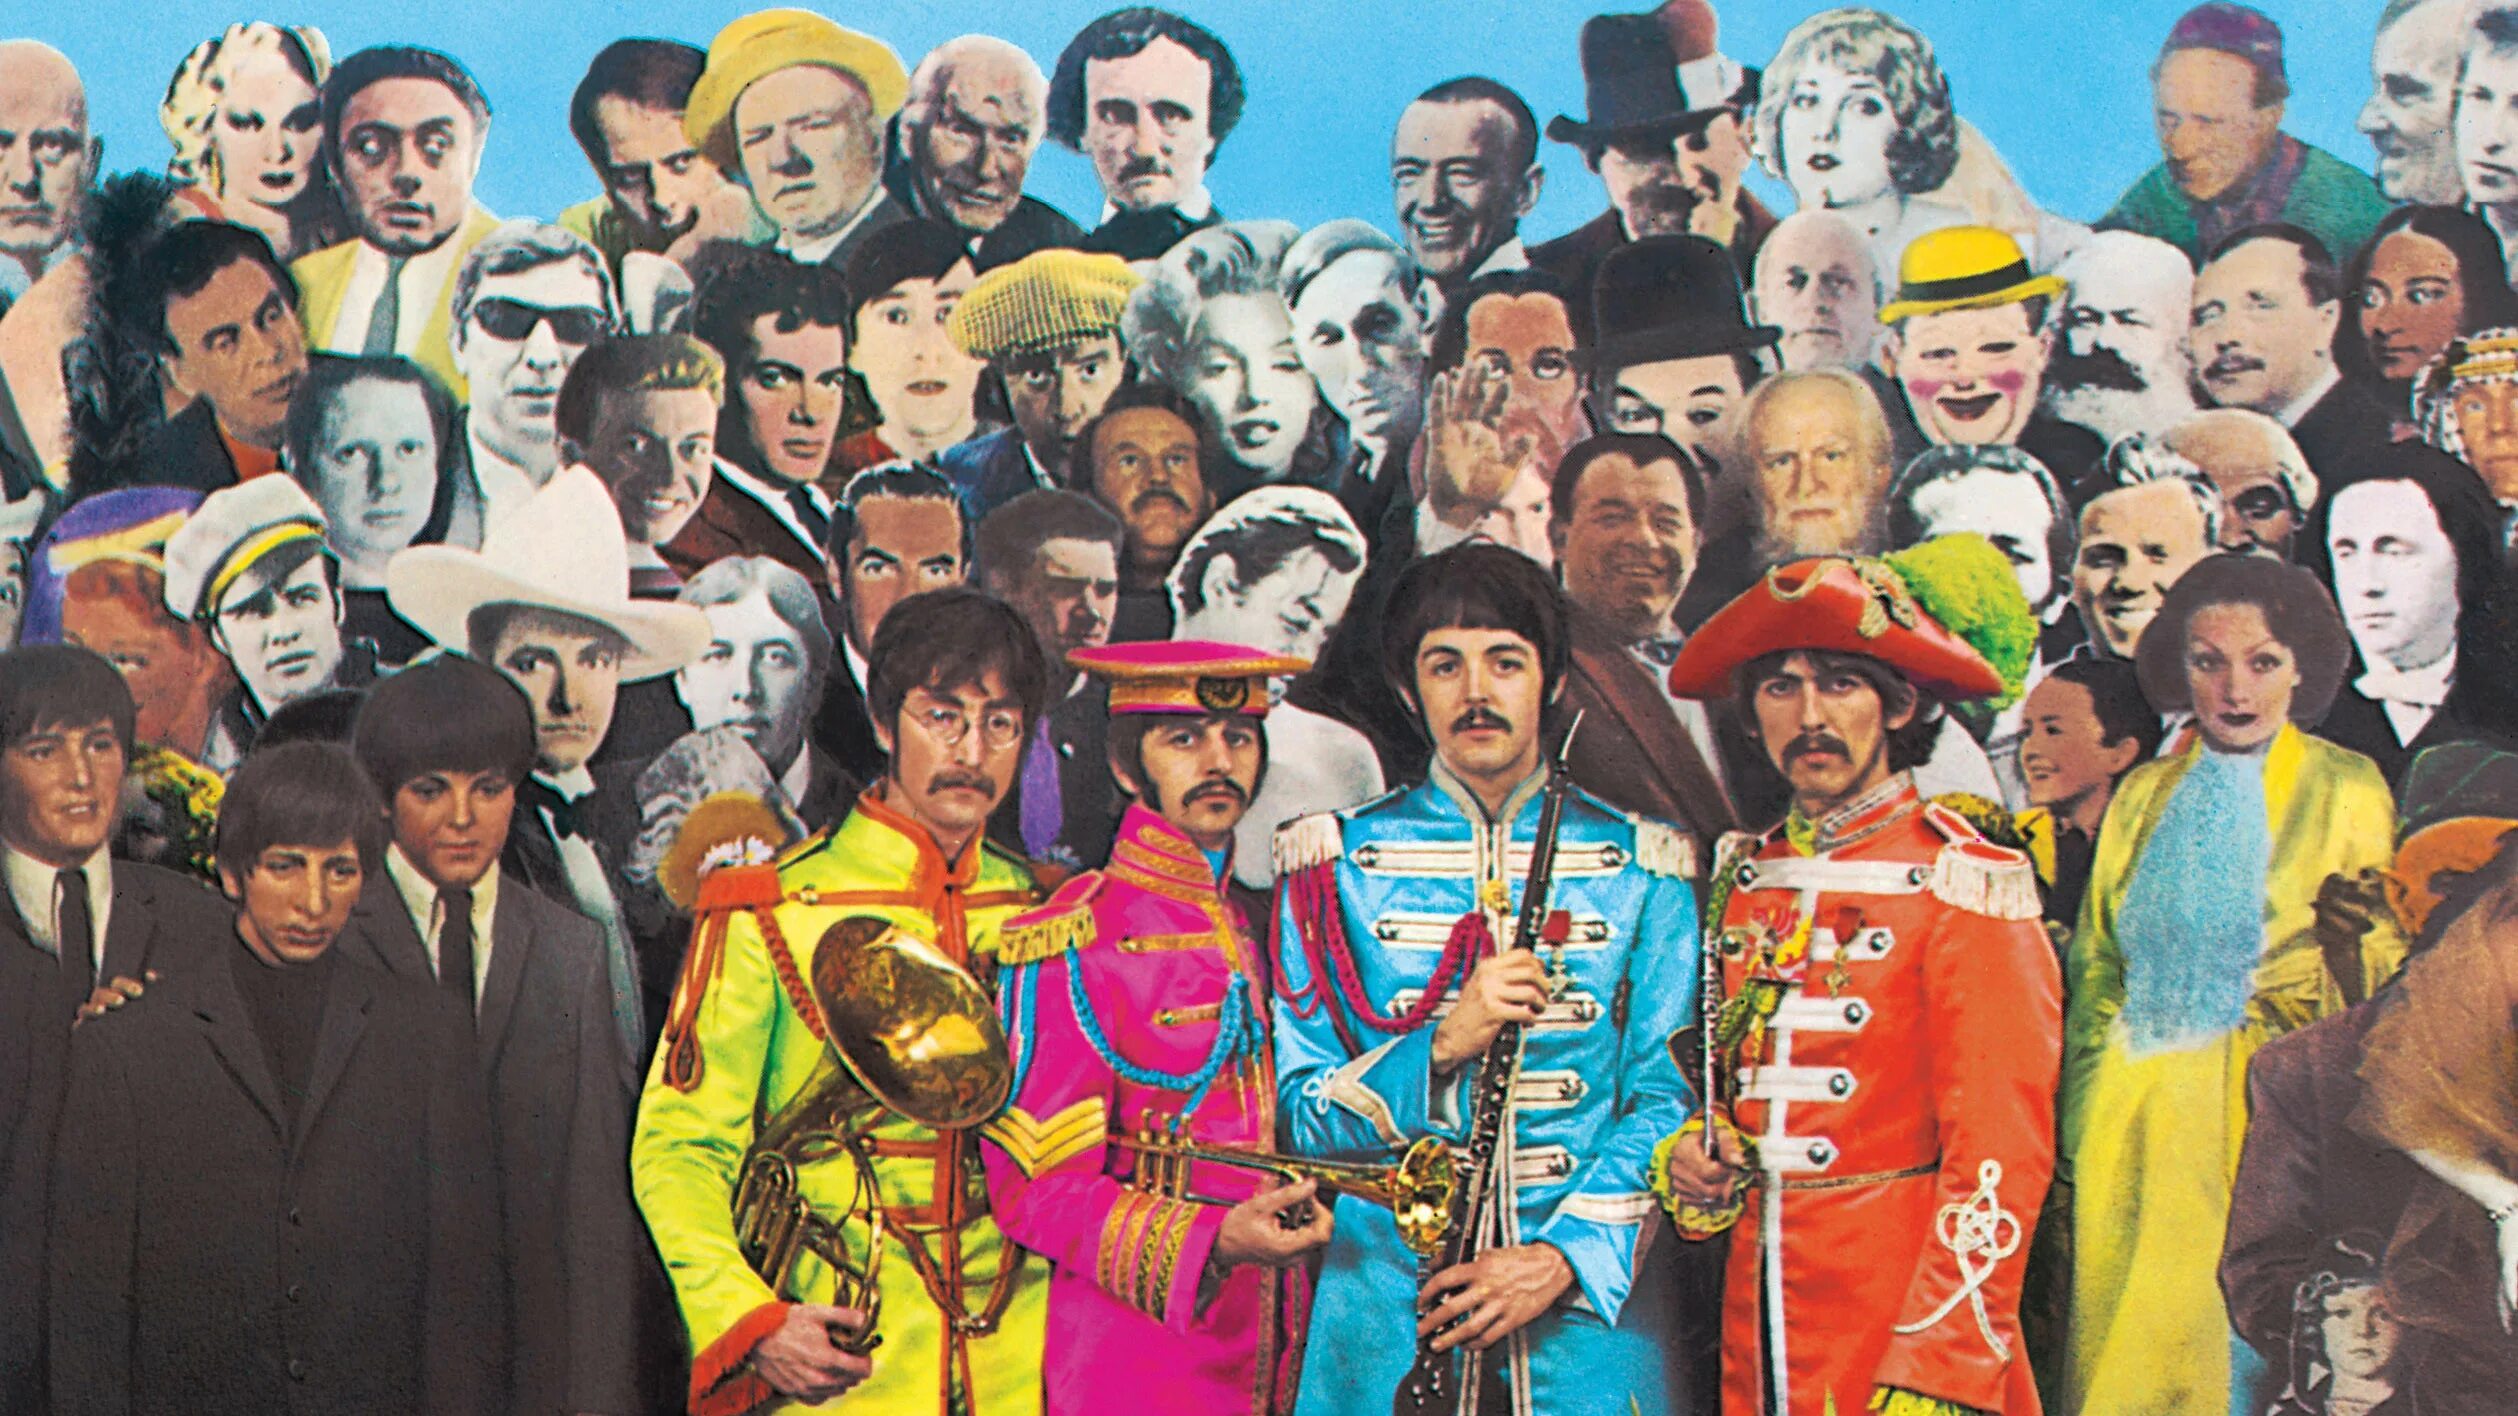 Beatles sgt pepper lonely. Sgt Pepper s Lonely Hearts Club Band. Sgt. Pepper’s Lonely Hearts Club Band the Beatles. Битлз сержант Пеппер. Битлз Sgt Pepper s Lonely Hearts Club Band.